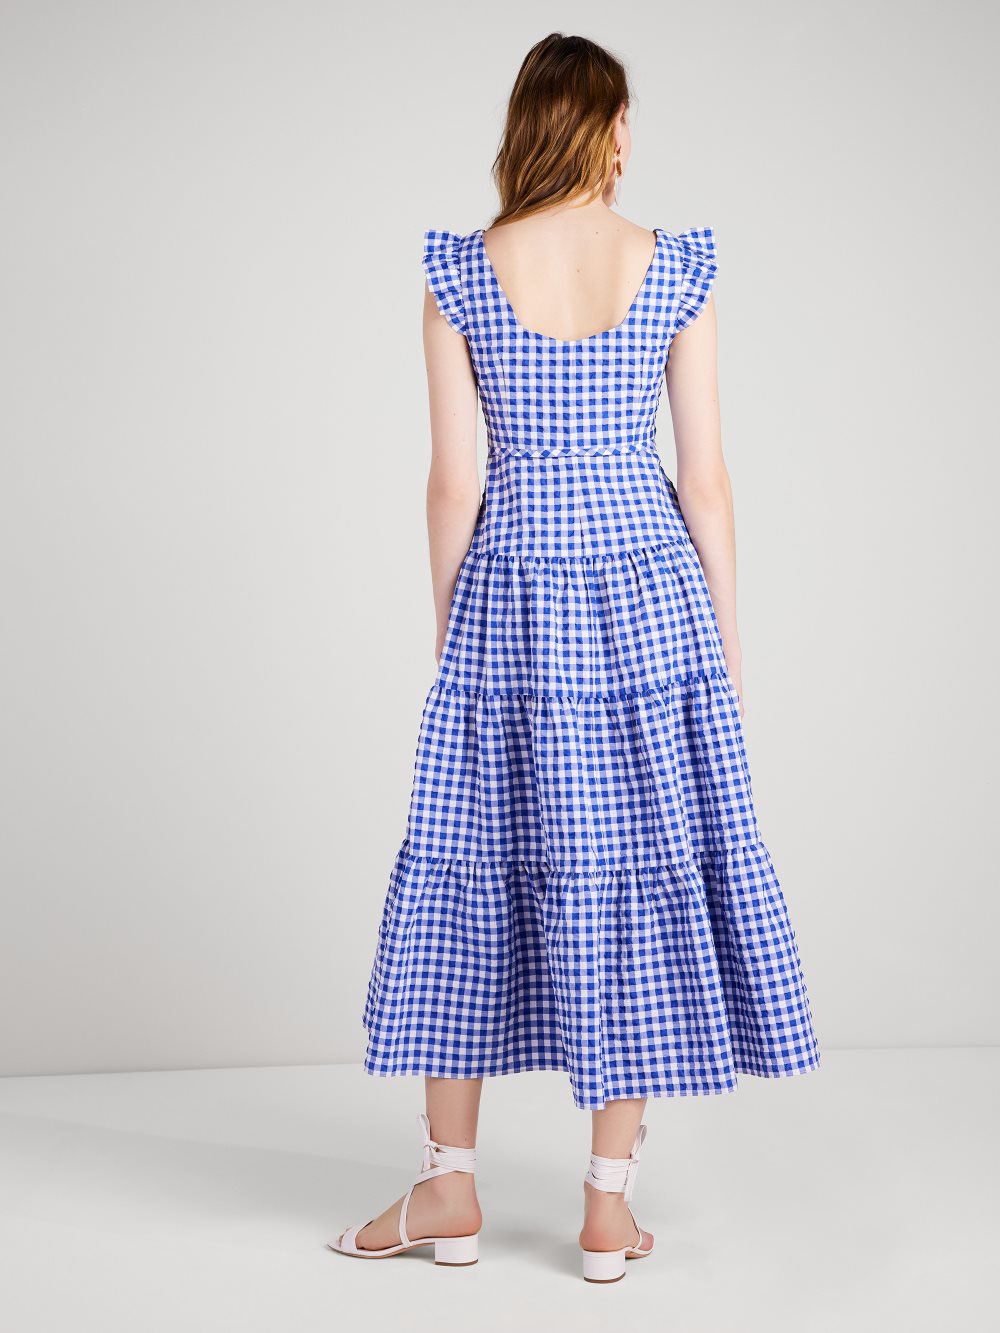 Women's blueberry gingham tiered dress | Kate Spade